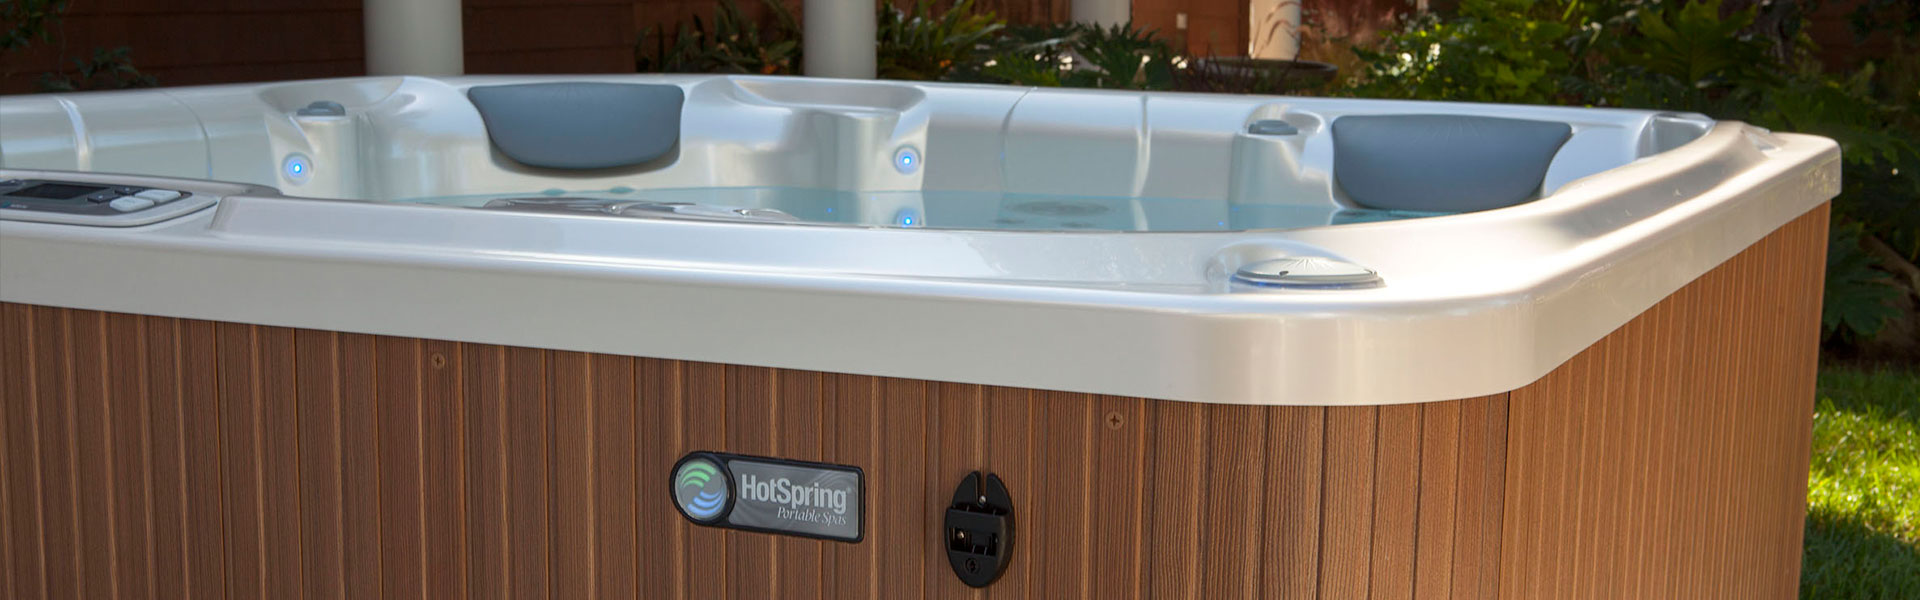 Beaverton Hot Tubs, Swim Spas and Sauna Dealer Shares How a Hot Tub Can Help Minimize Chronic Aches and Pains